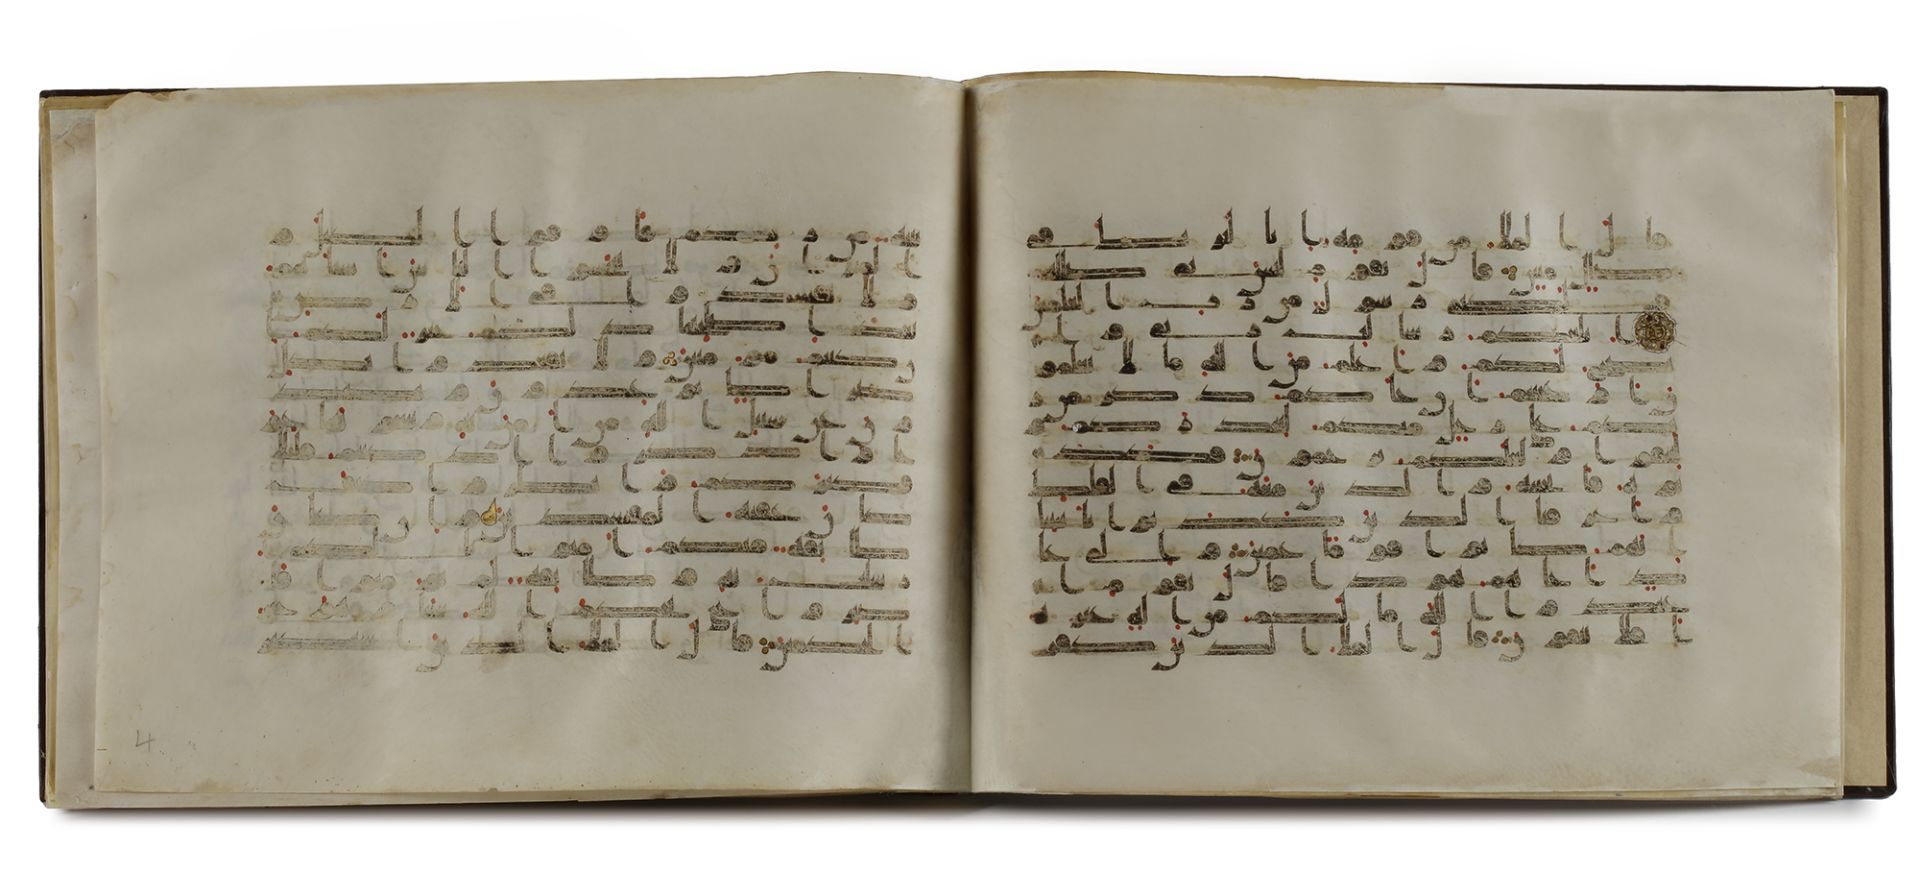 A BOUND GROUP OF TWENTY-NINE LEAVES FROM SEVEN SURAHS OF A DISPERSED MANUSCRIPT OF THE QURAN WRITTEN - Bild 6 aus 33